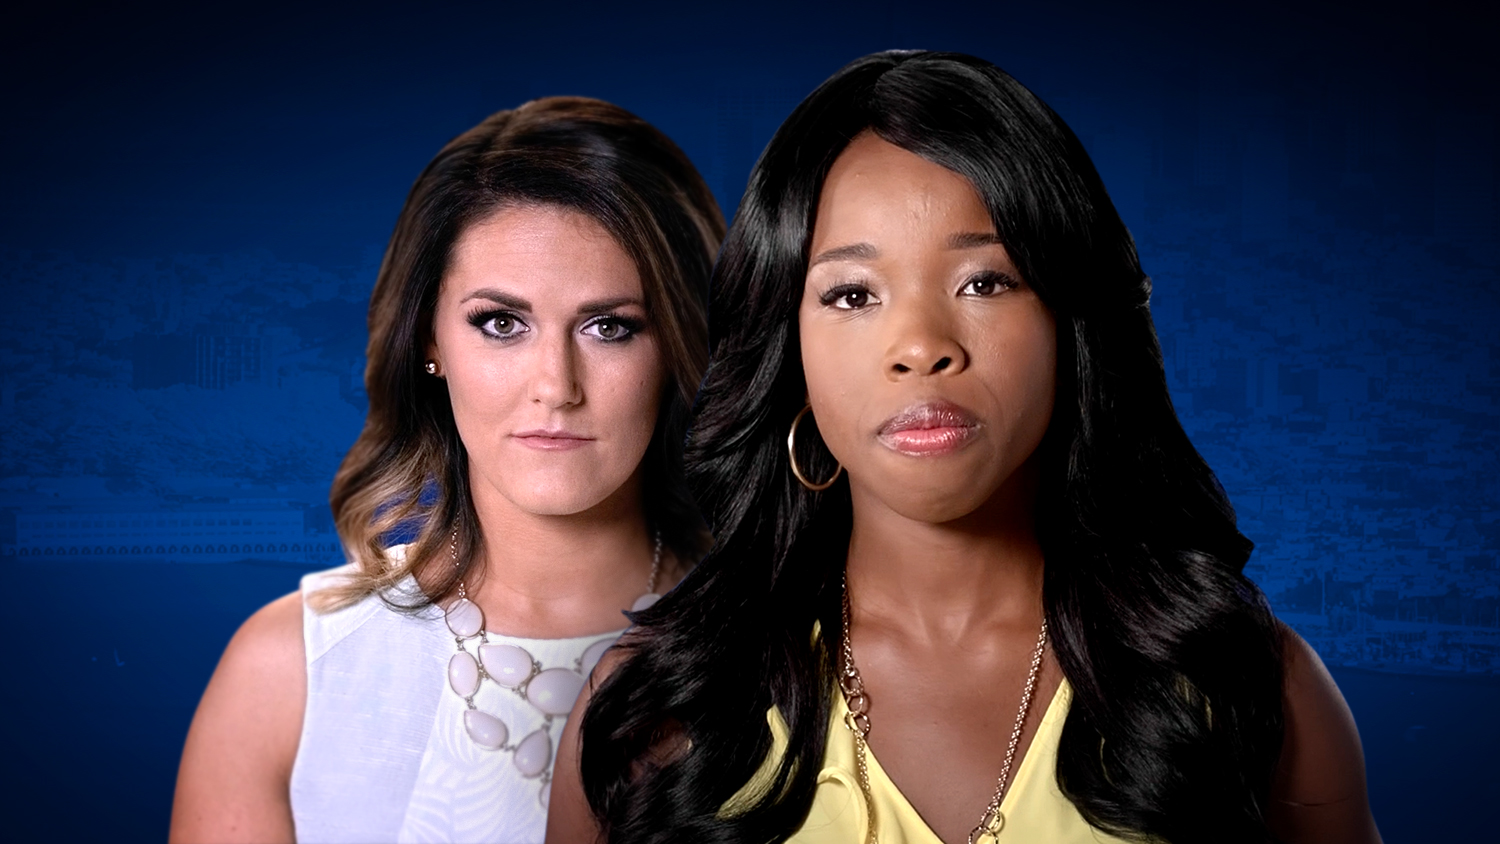 NRA Releases Powerful New Ads Featuring Millennial Women